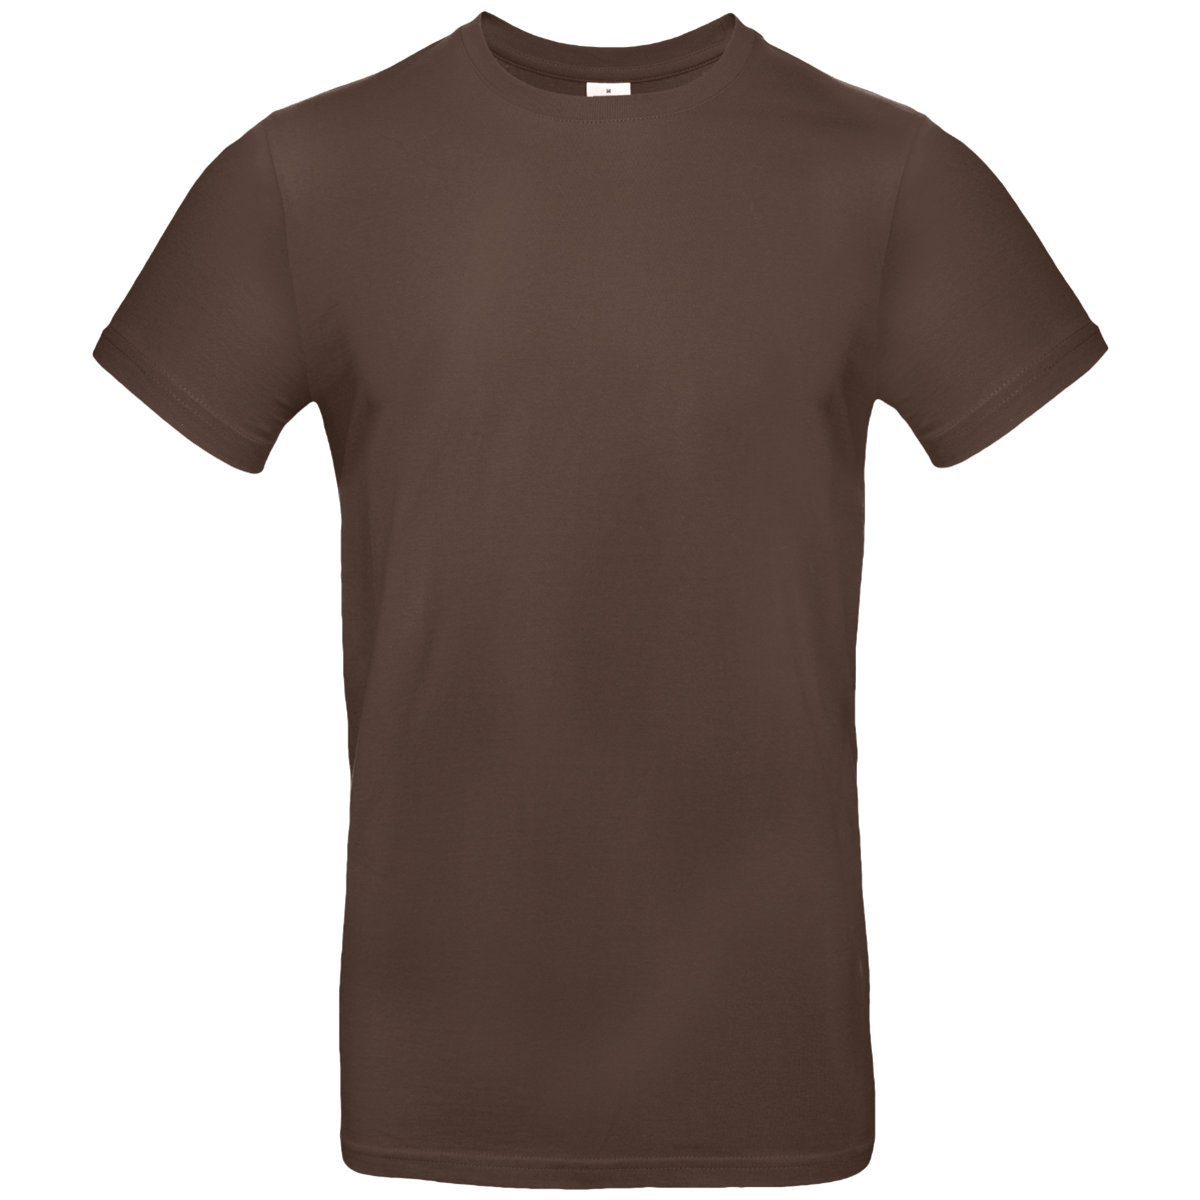 Tee-Shirt Homme Personnalisable Sur Tunetoo Brown